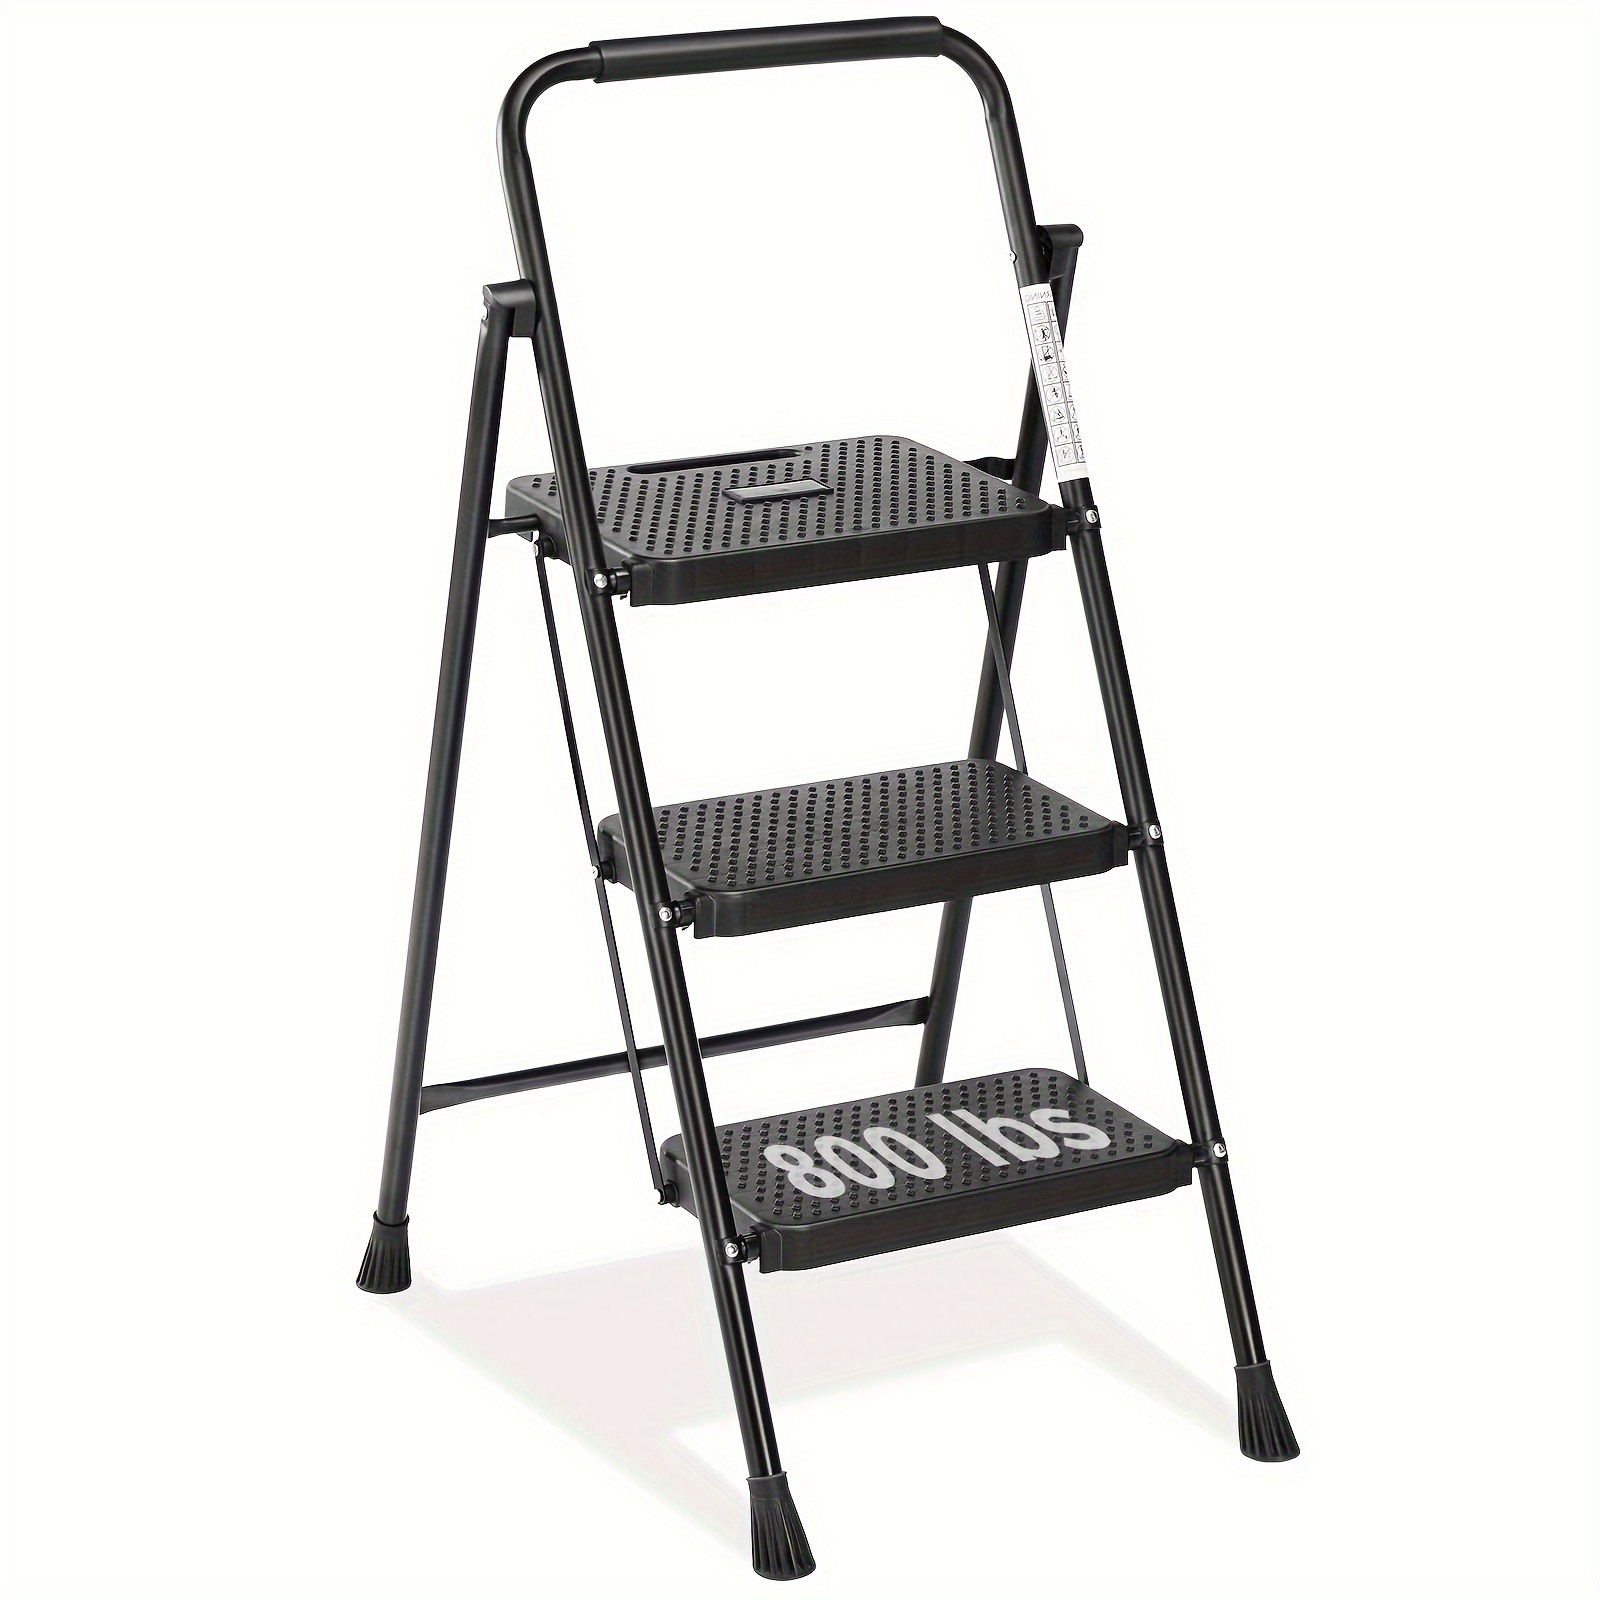 

3 Step Ladder, 3 Step Stool Ergonomic Folding Step Stool With Wide Anti-slip Pedal Sturdy Step Stool For Adults Multi-use For Household, Kitchen, Office Step